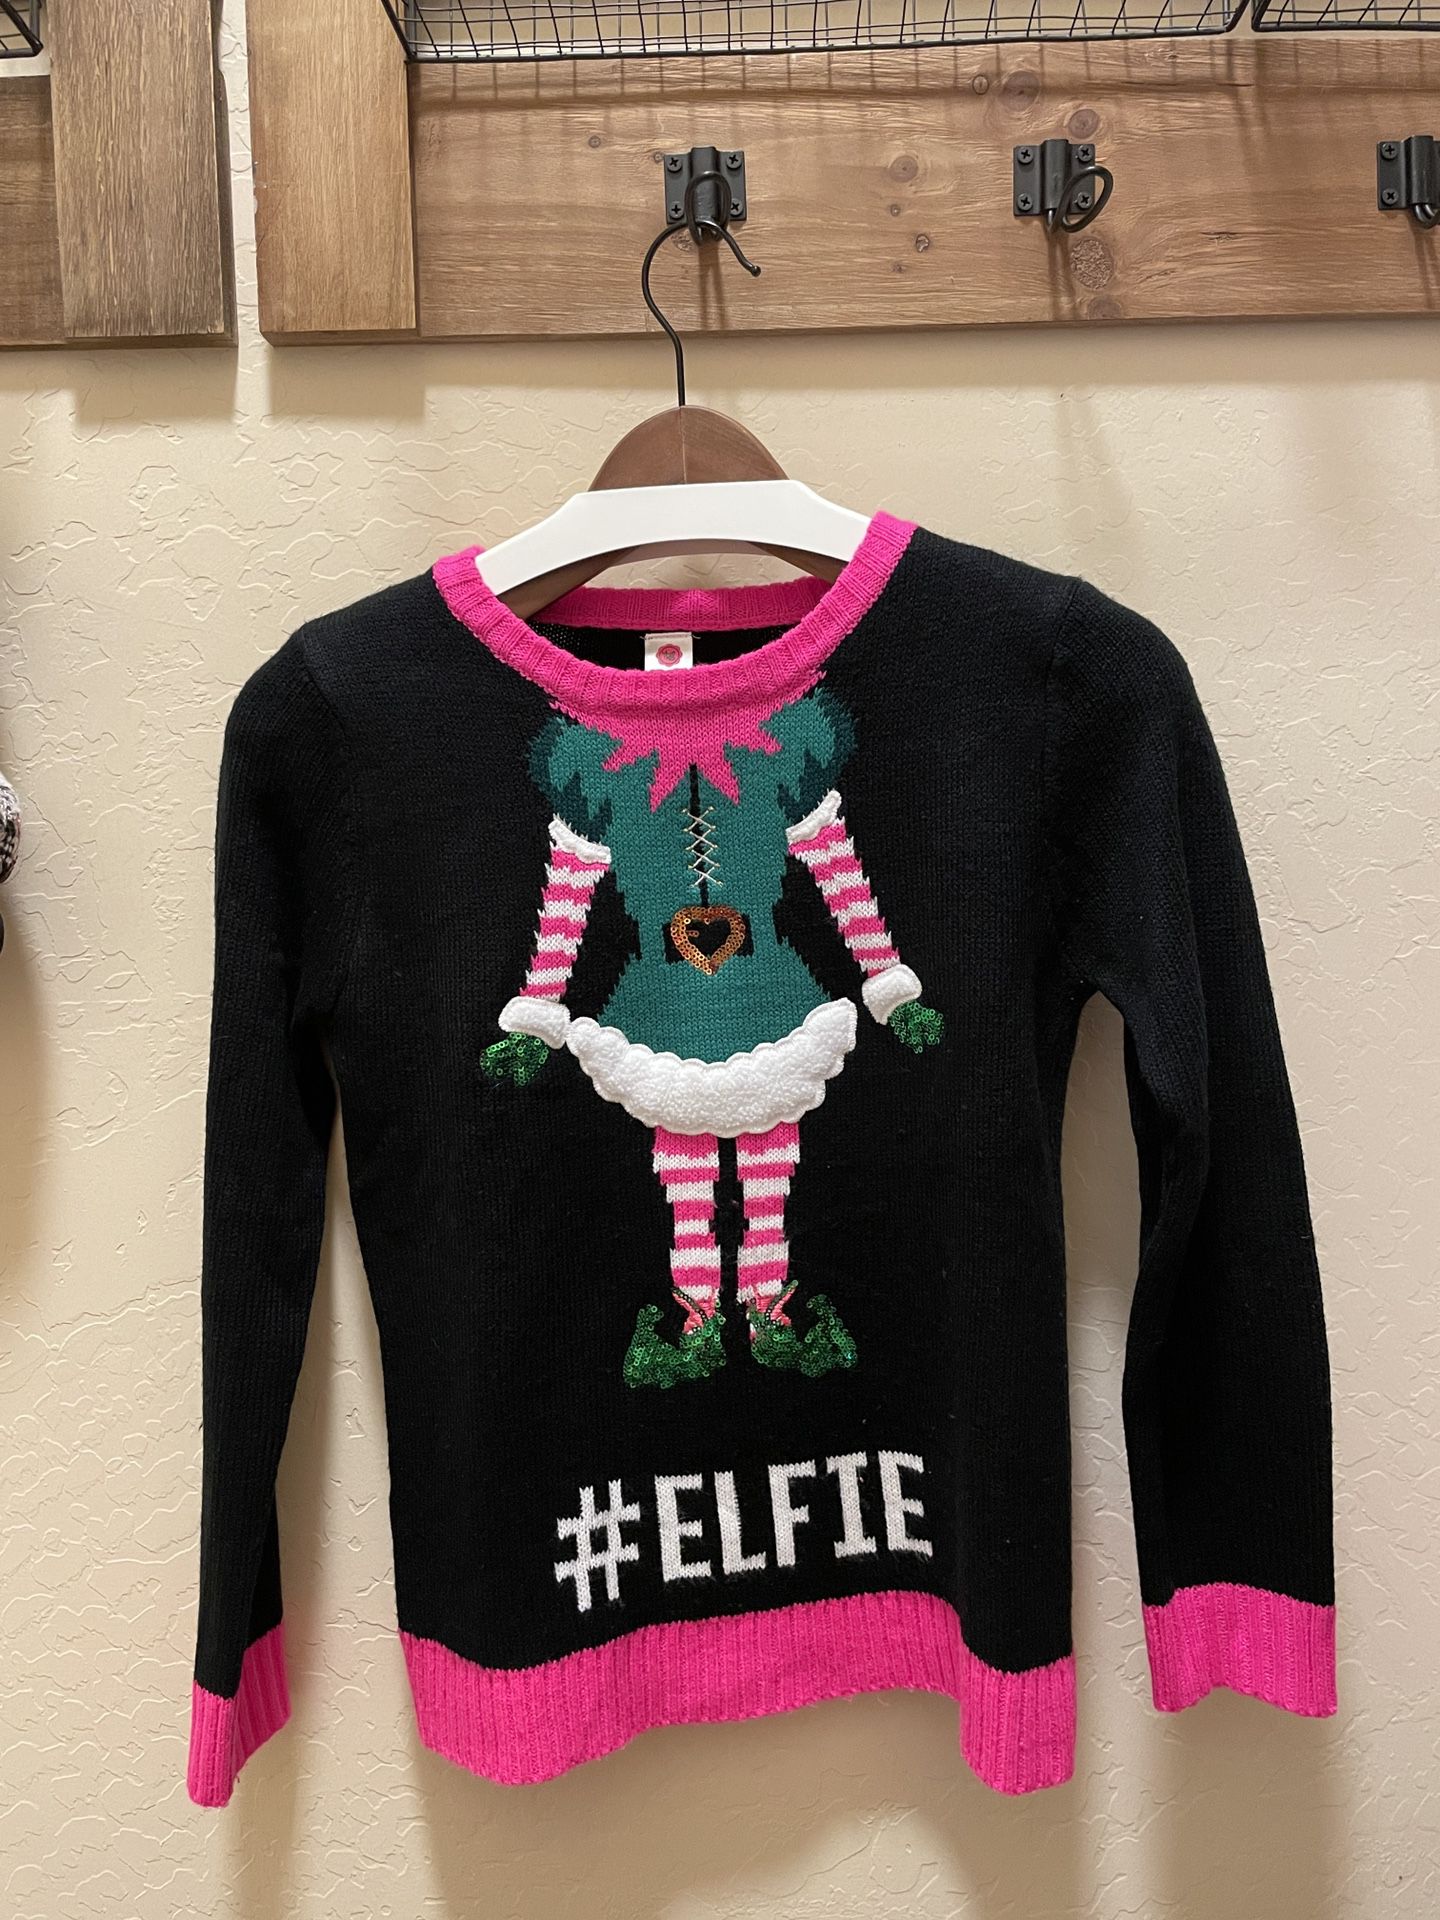 New Ugly Christmas Sweater - Girls Size Large(14) $10